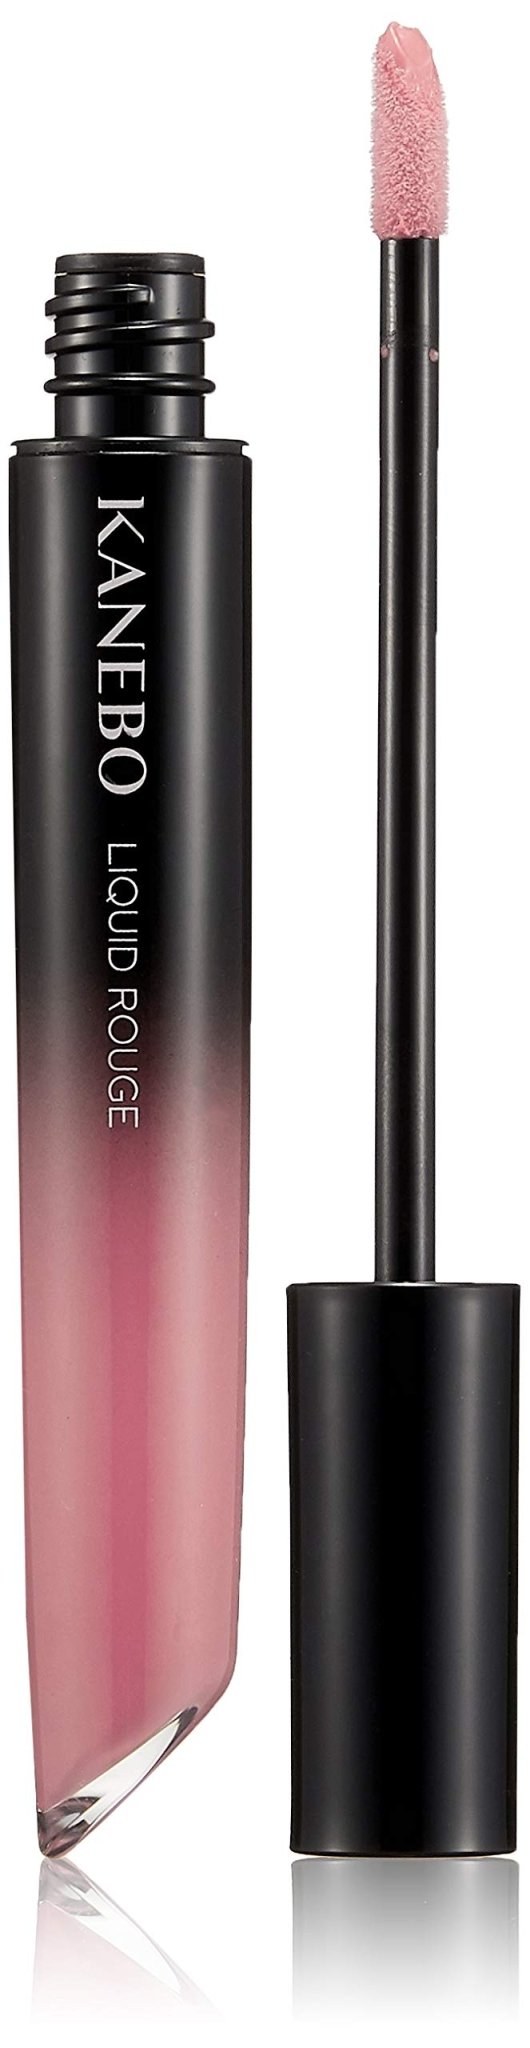 Kanebo Keep Going Liquid Rouge 06 Dull Red Lipstick